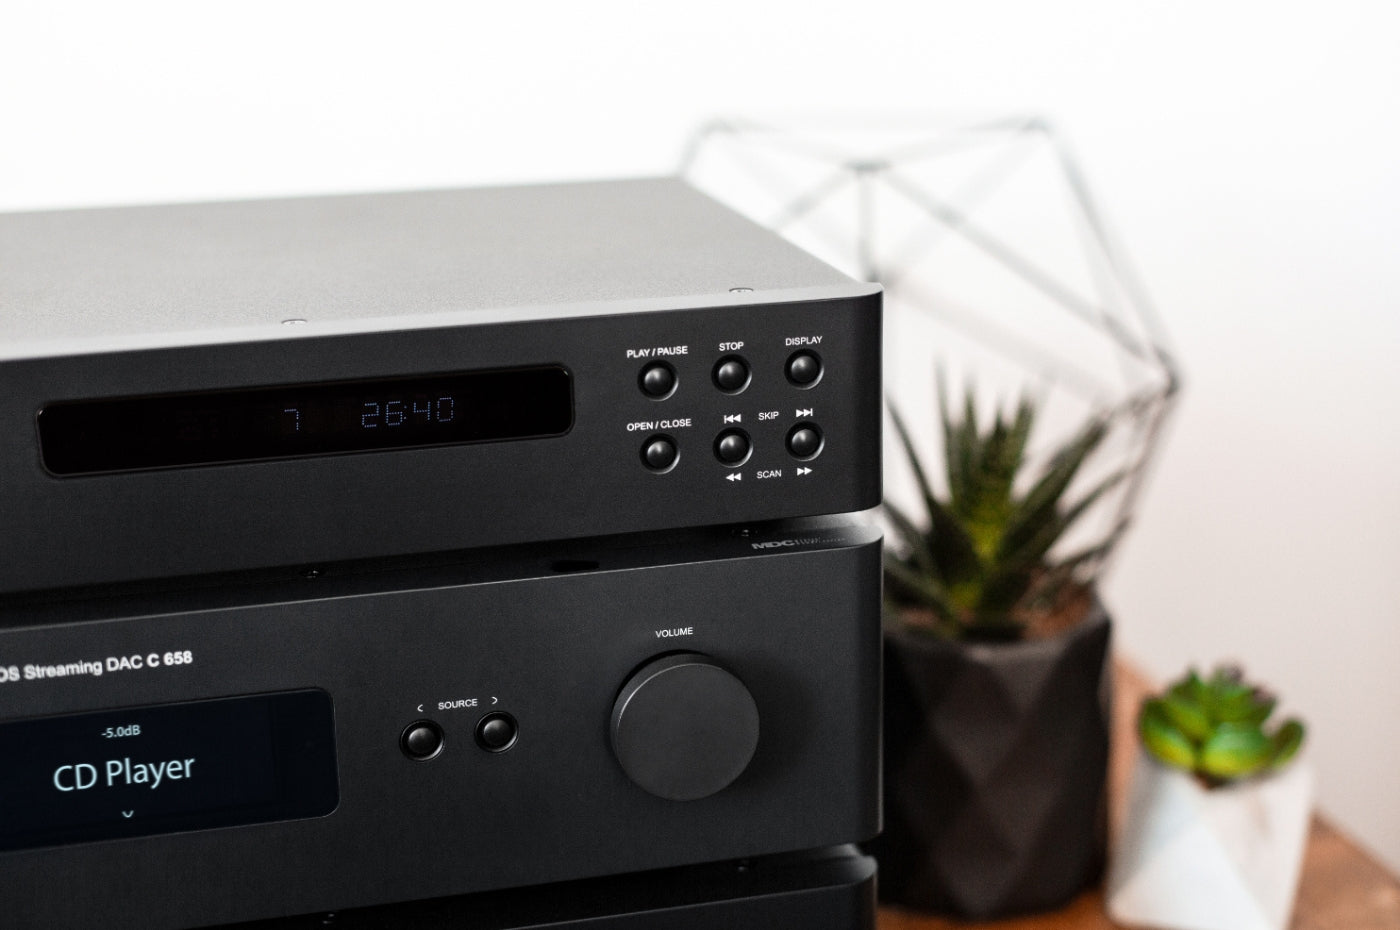 NAD C658 Streaming DAC & Preamplifier